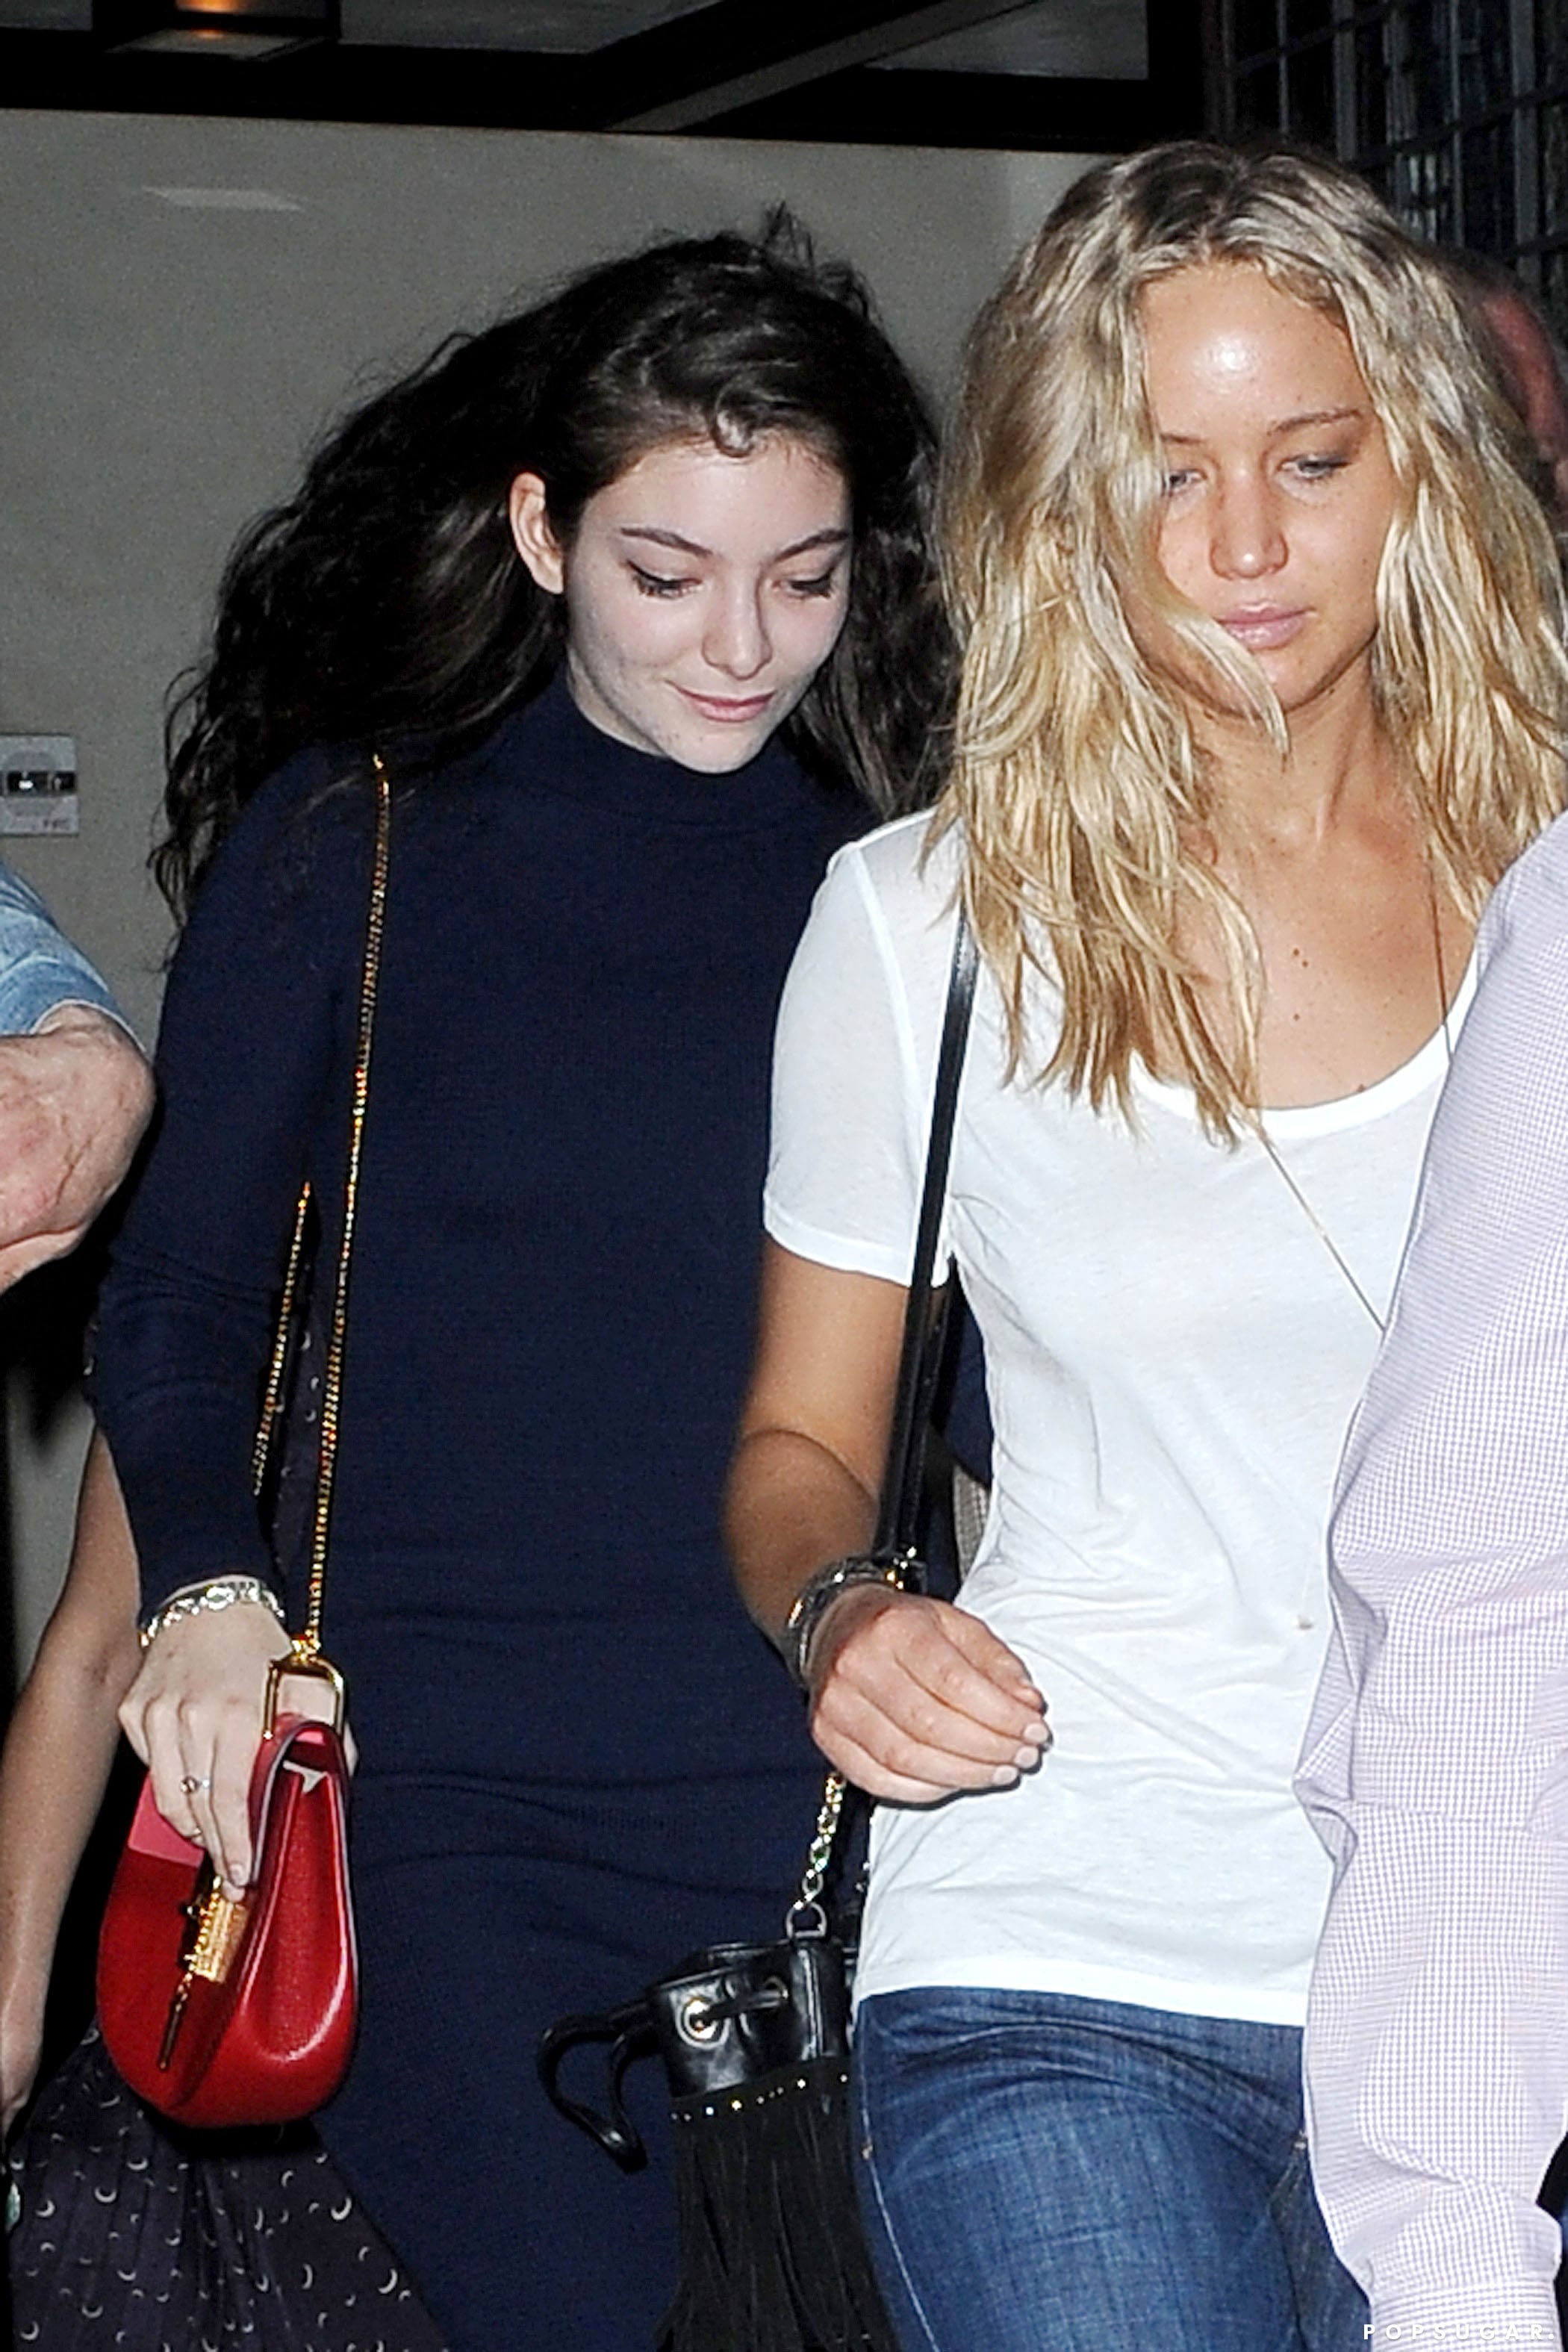 Jennifer Lawrence and Lorde in NYC | Pictures | POPSUGAR Celebrity